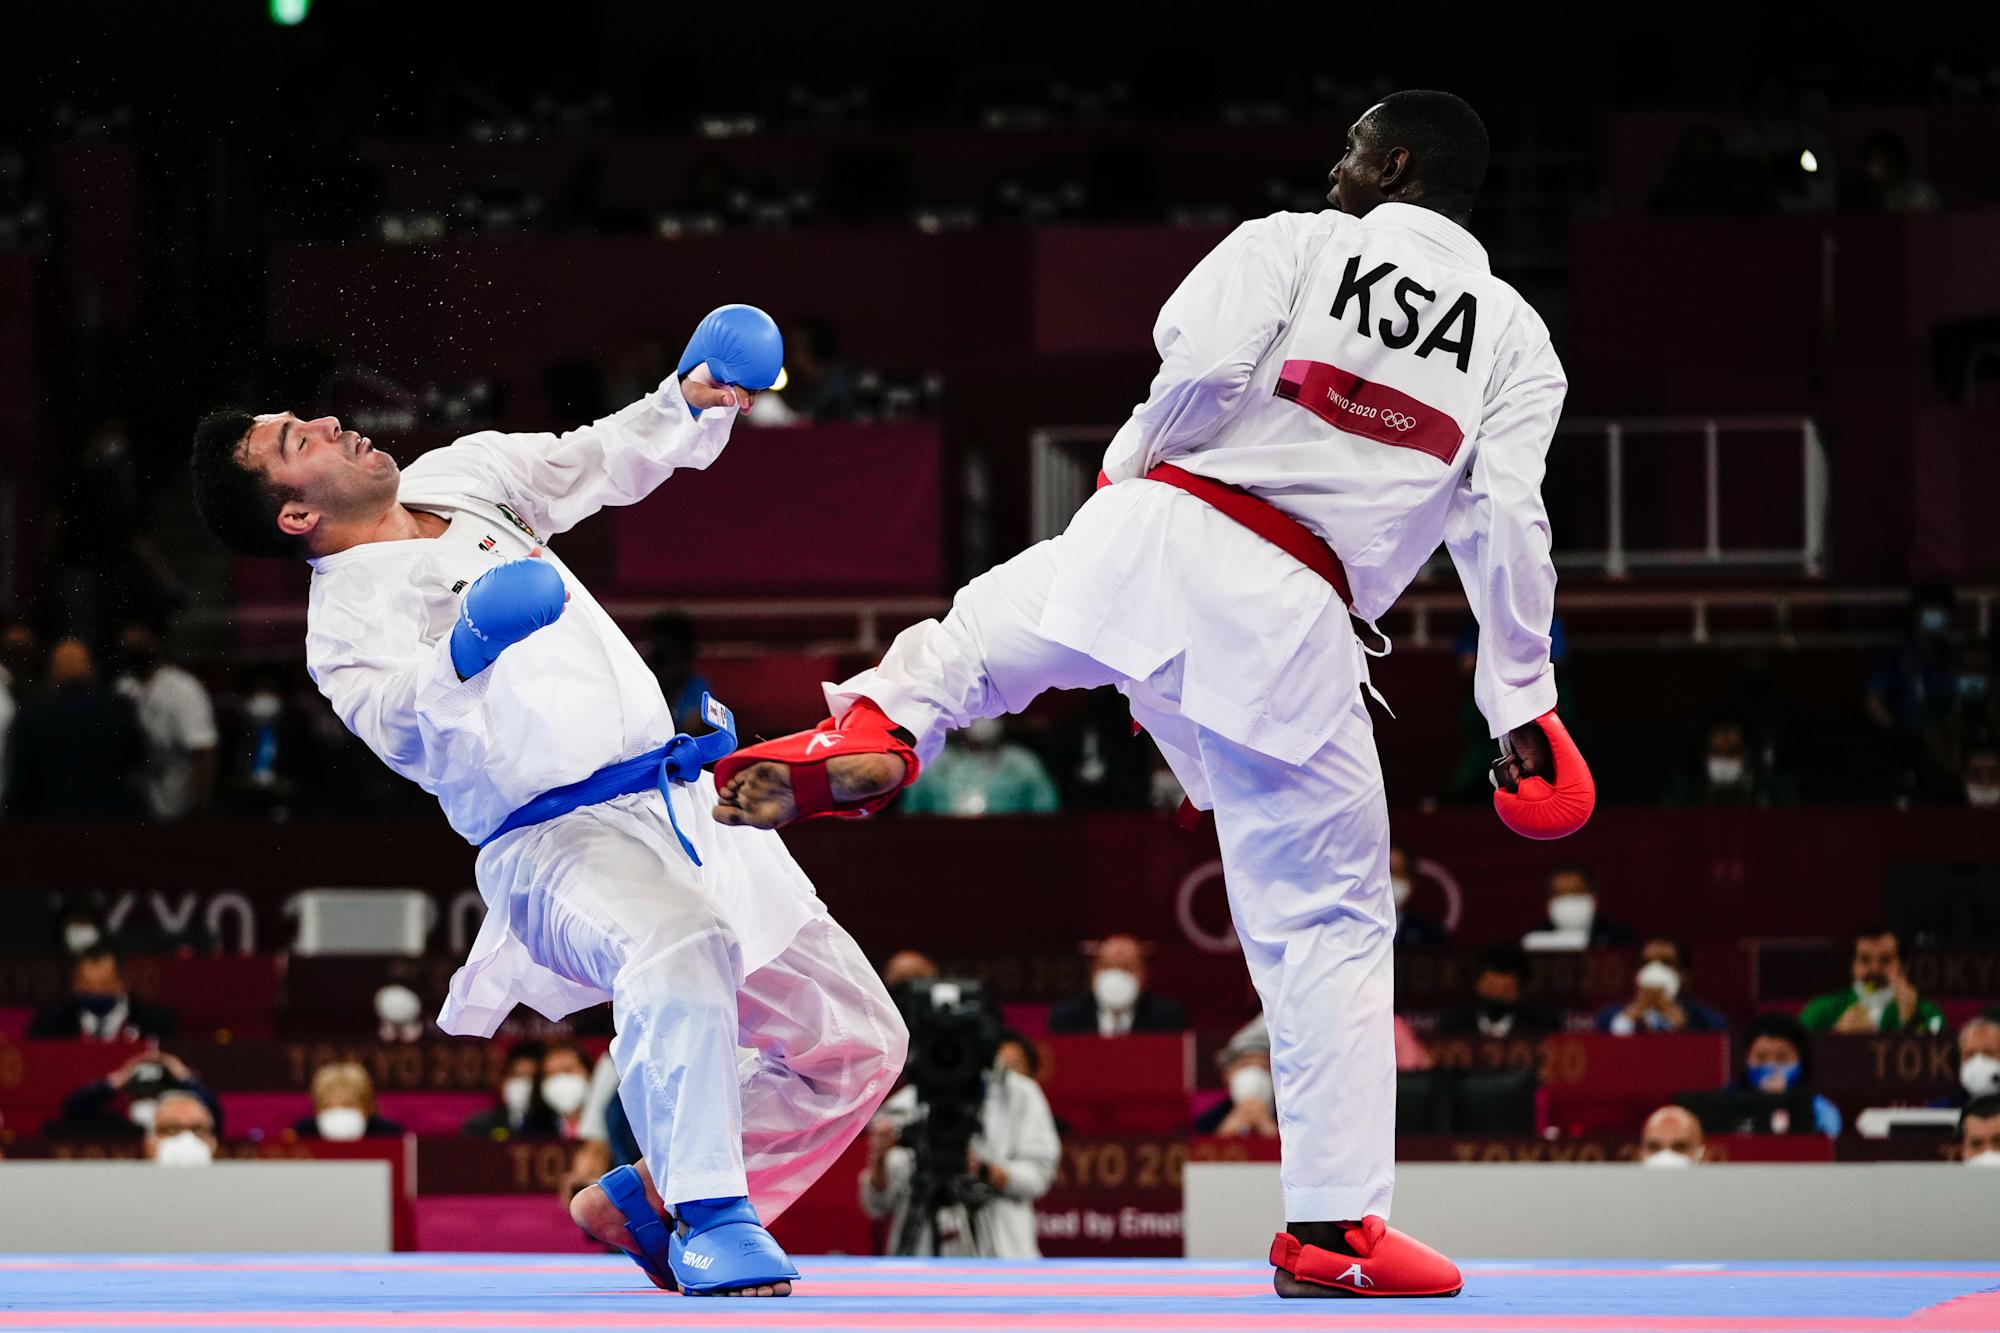 Brutal KO kick leads to Olympics disqualification of would-be winner in karate gold medal match